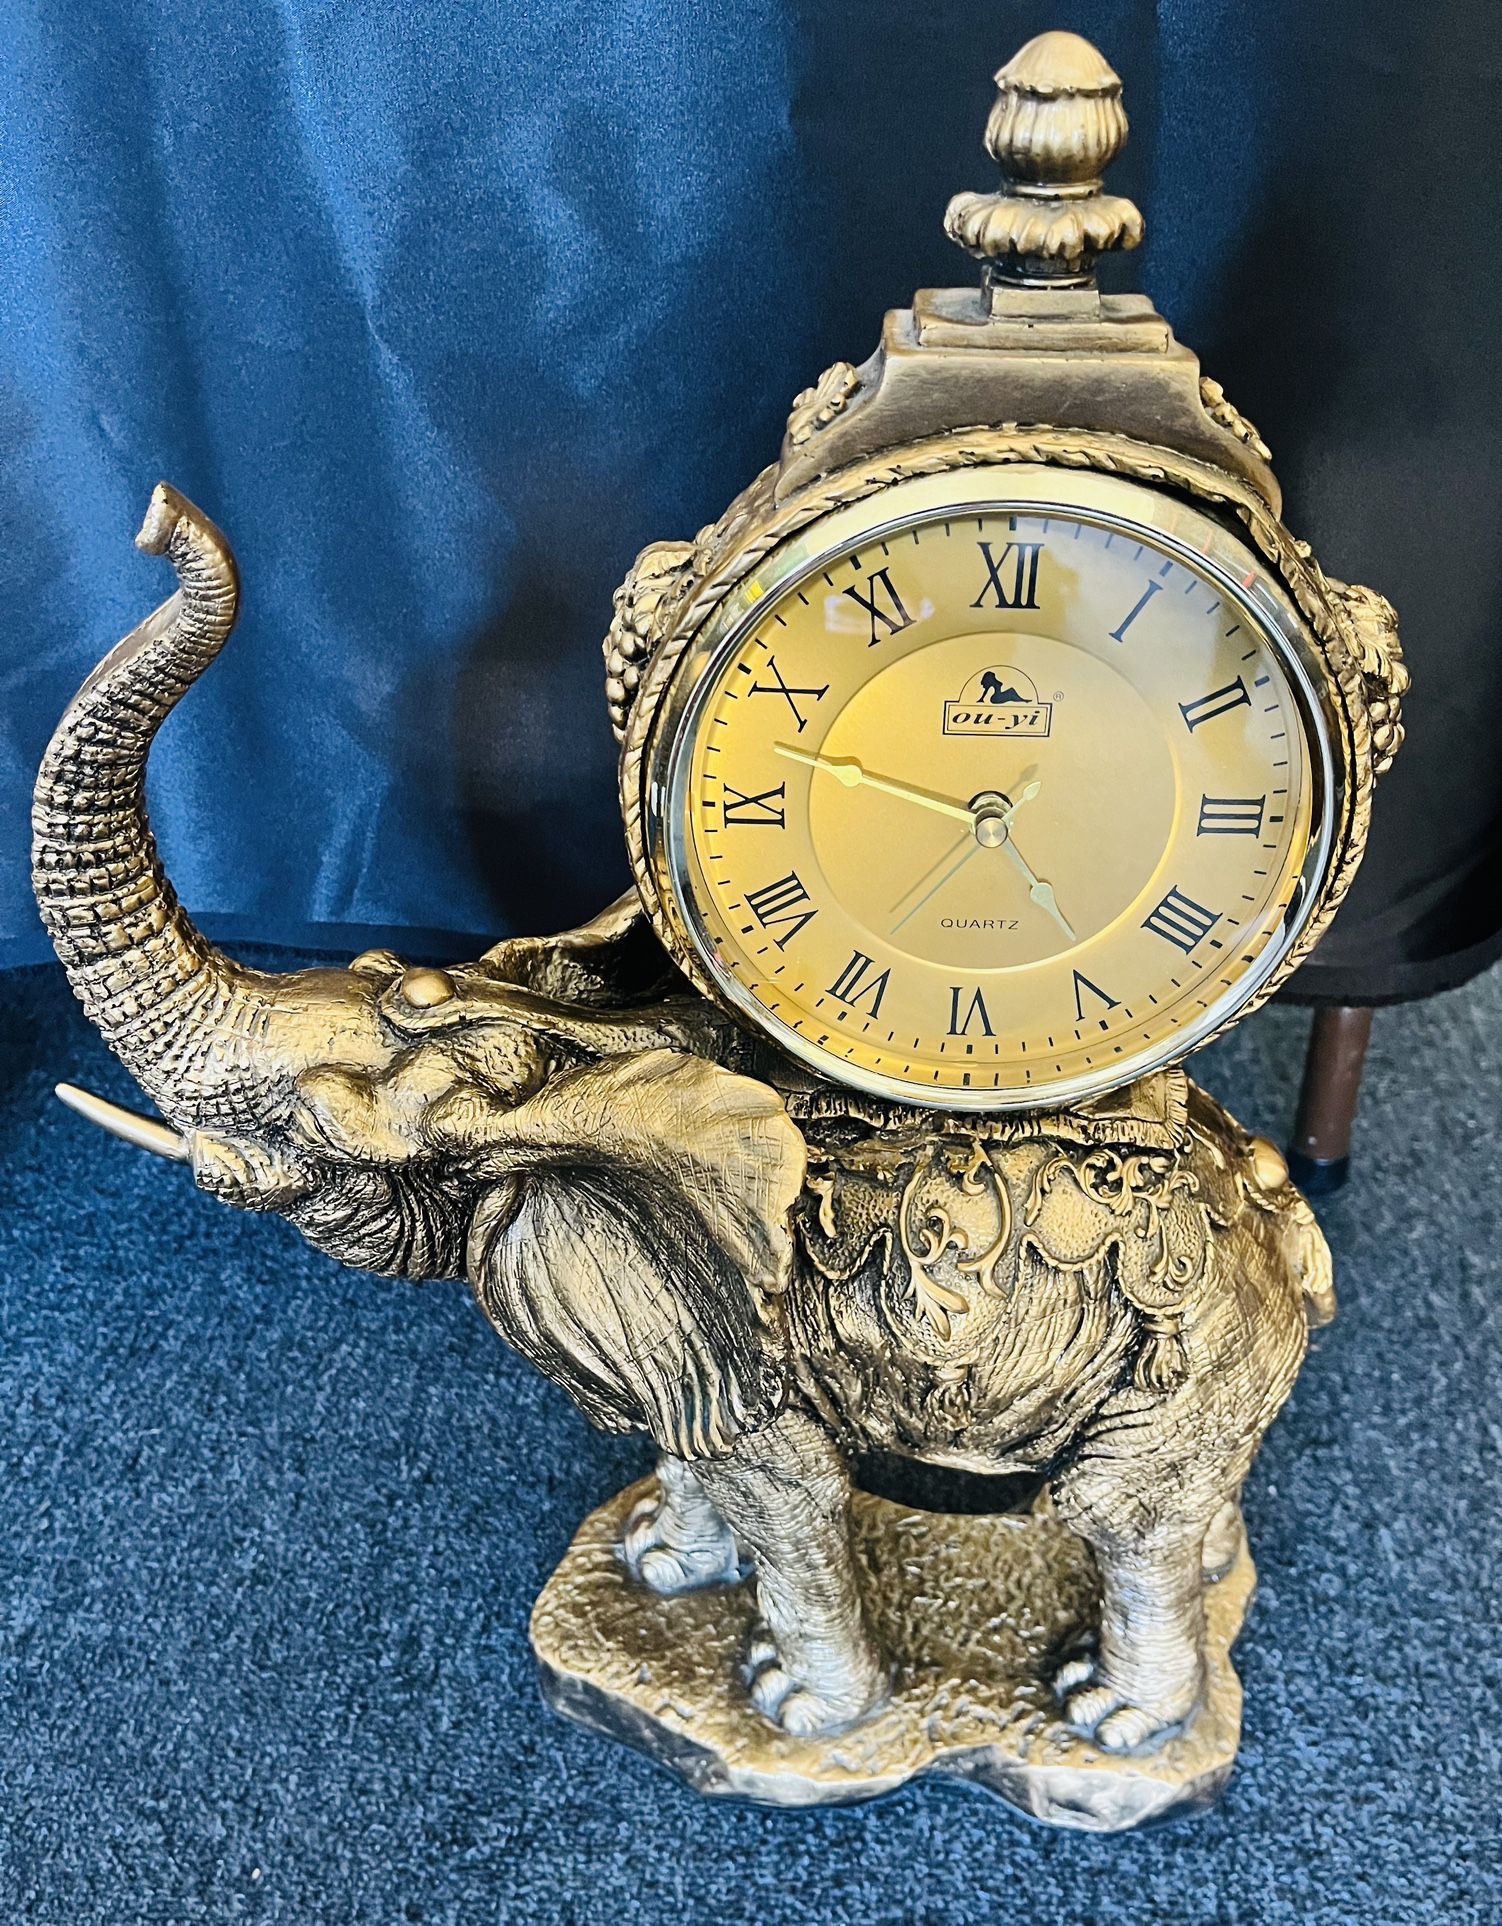 Elephant Statue With A Clock